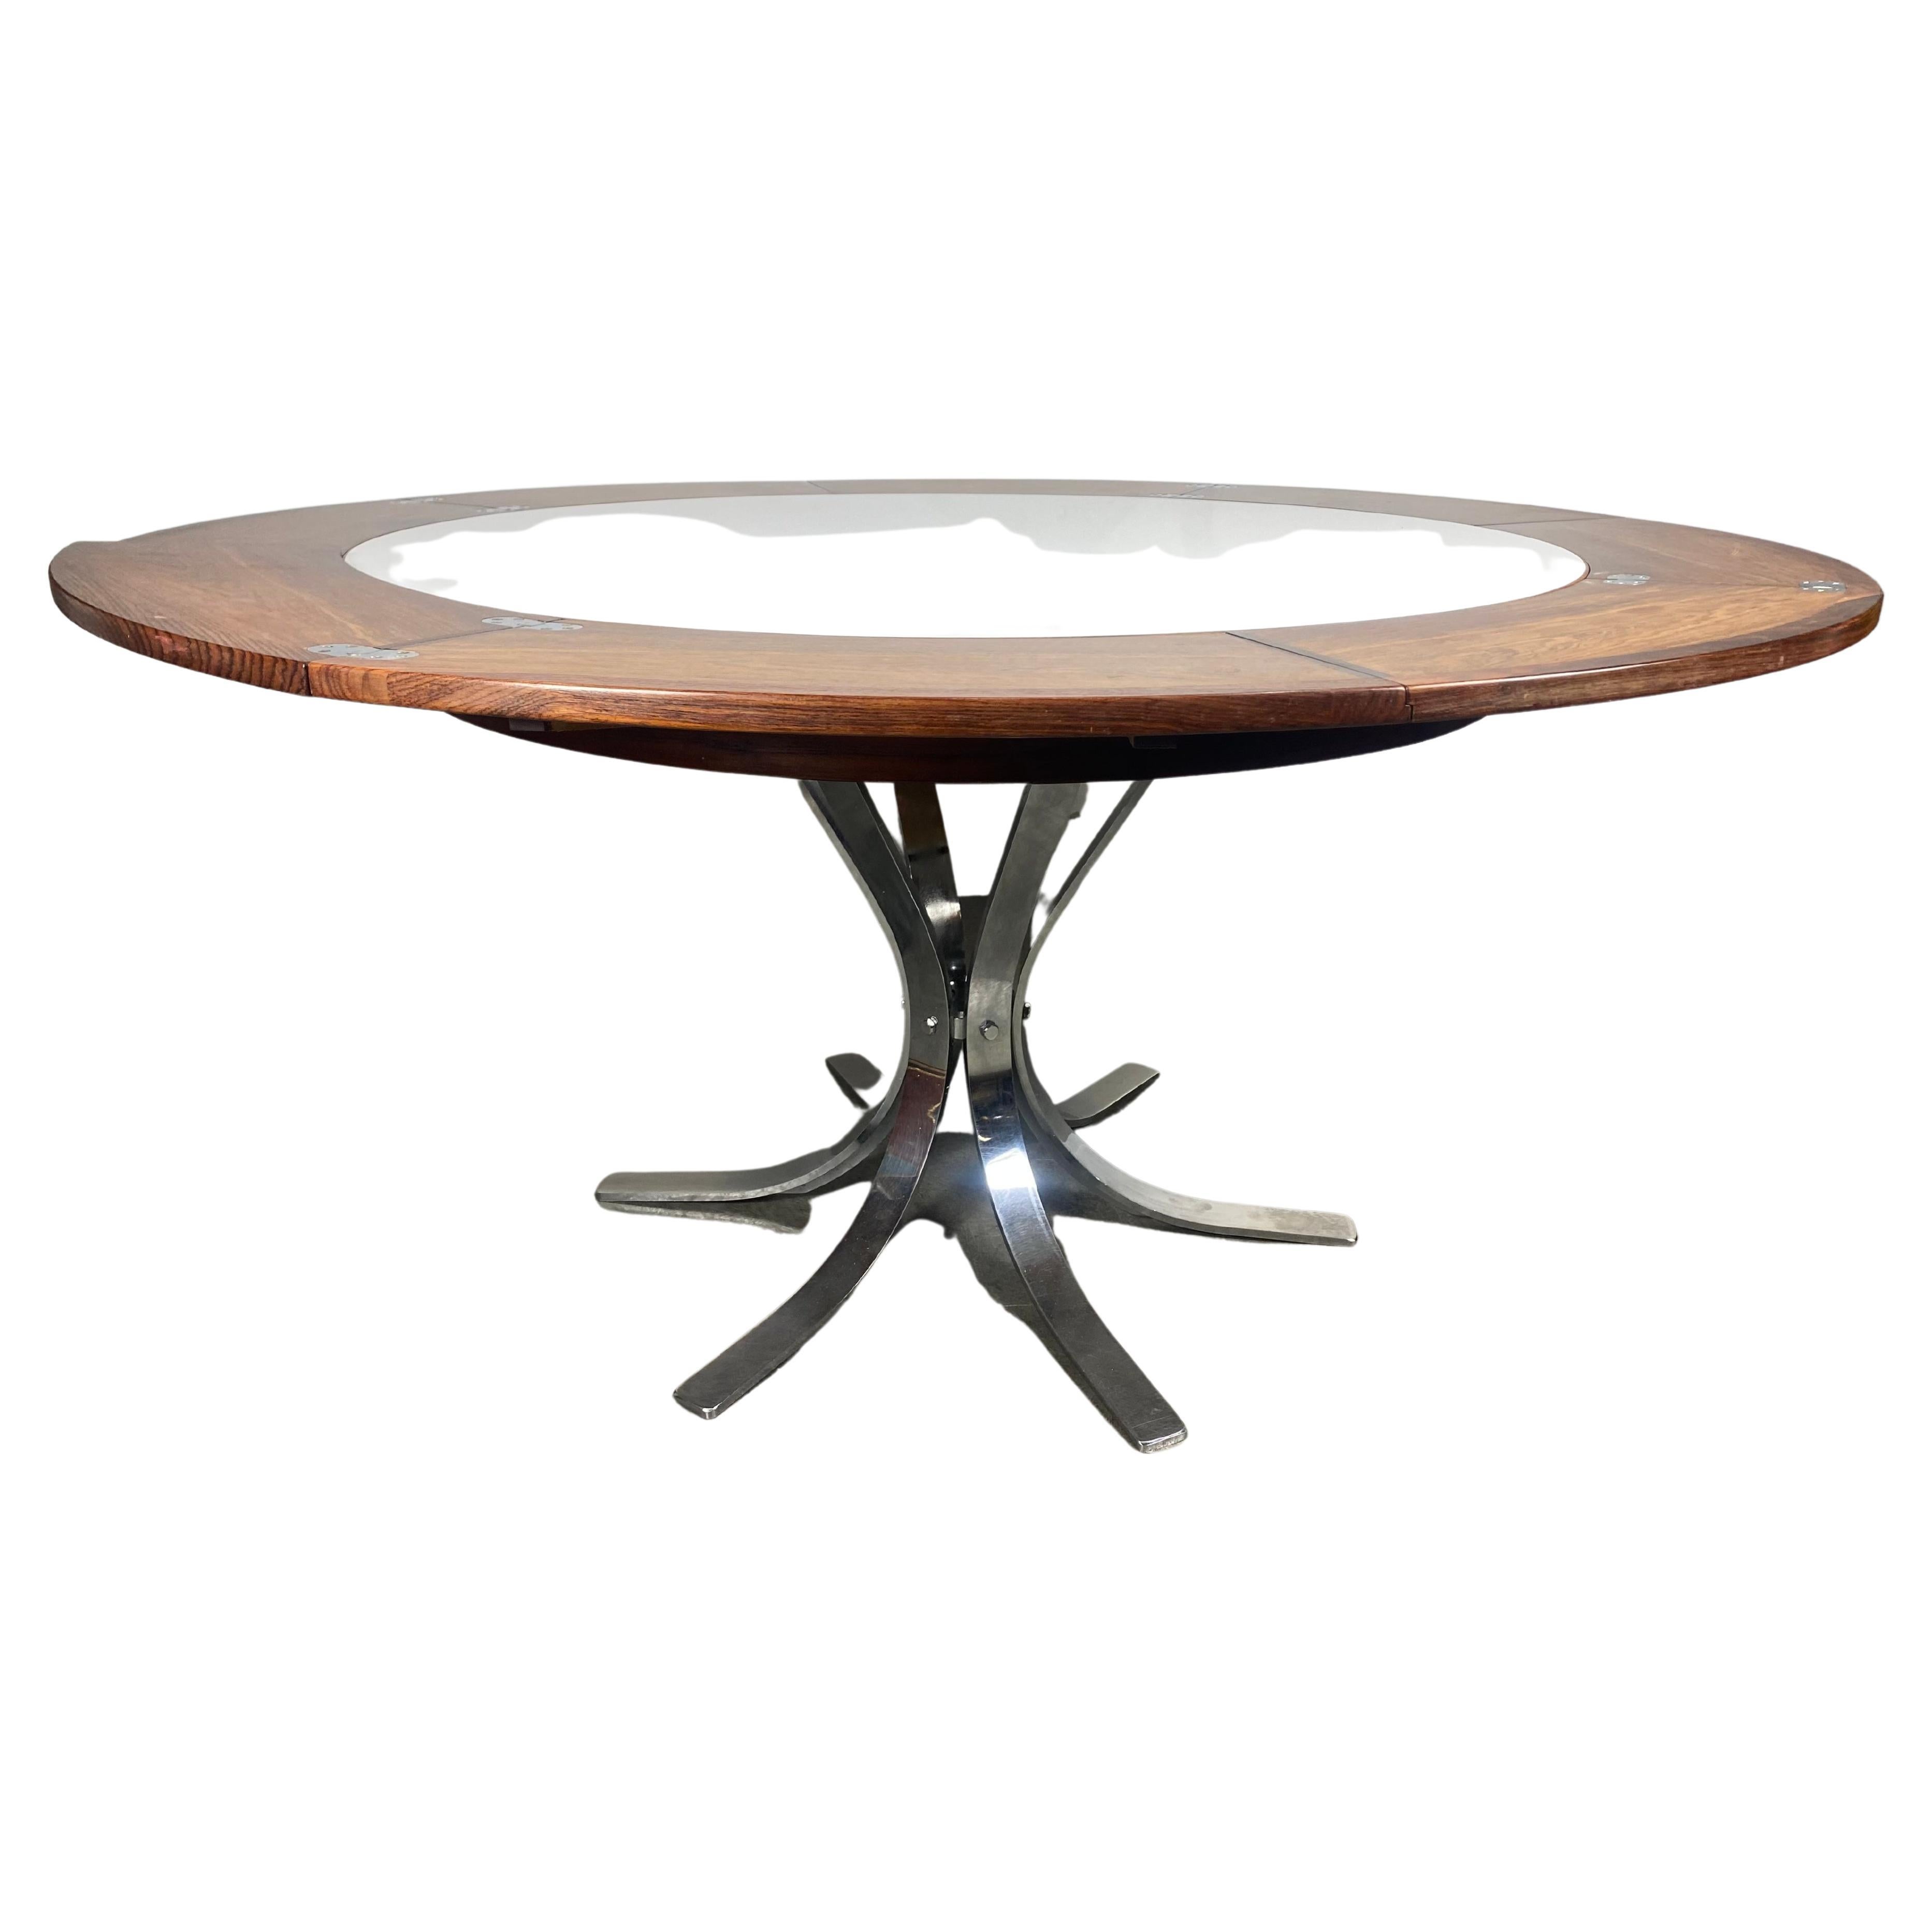 Dyrlund "Lotus" Rosewood Dining Table, "Flip-Flop" Expanding Top For Sale